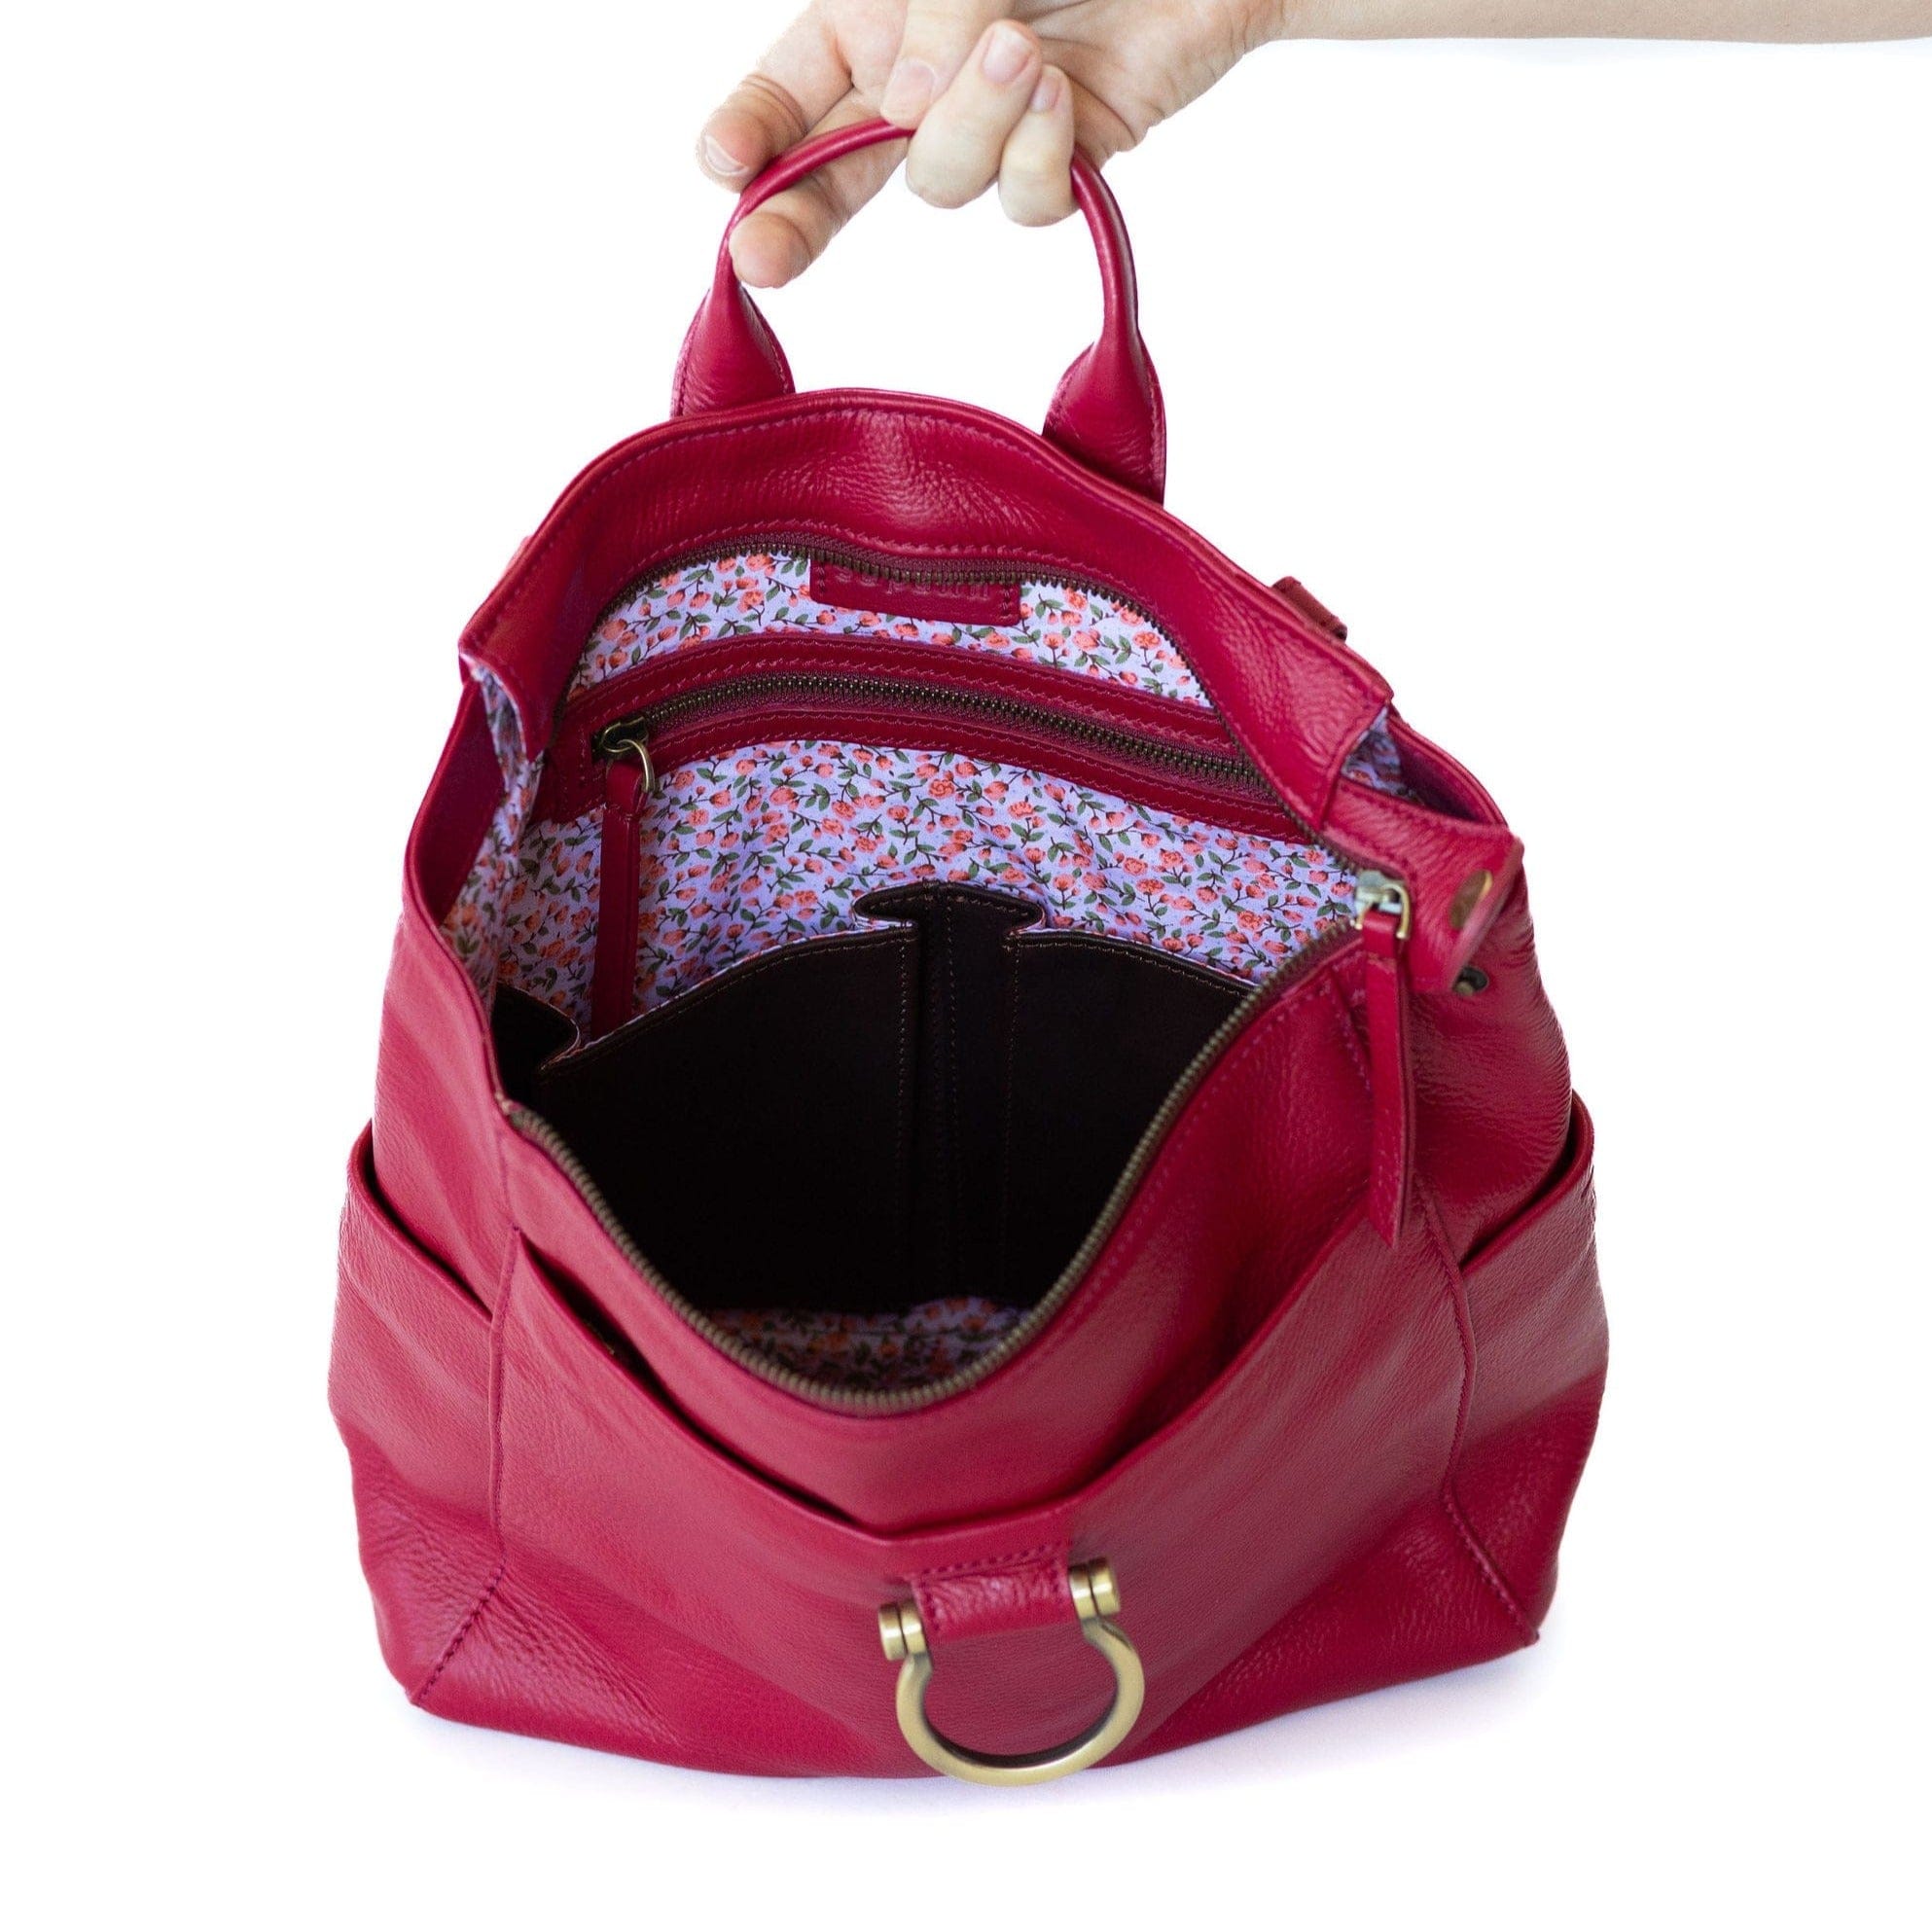  Purse for Women Convertible Backpack Purses and Handbags  Crossbody Shoulder Bag - Red : Clothing, Shoes & Jewelry